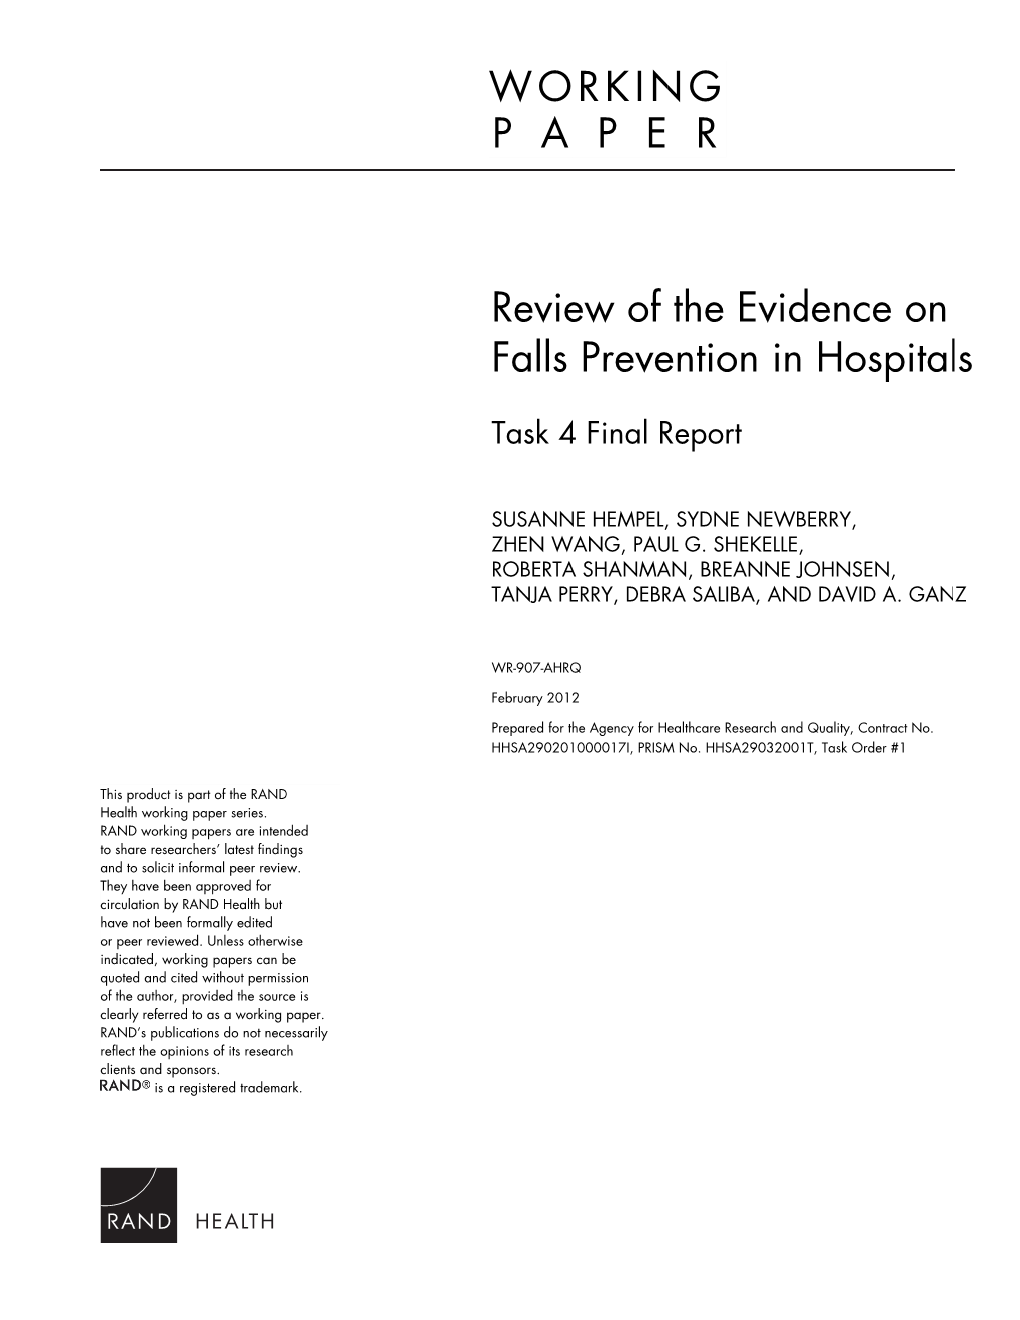 Review of the Evidence on Falls Prevention in Hospitals: Task 4